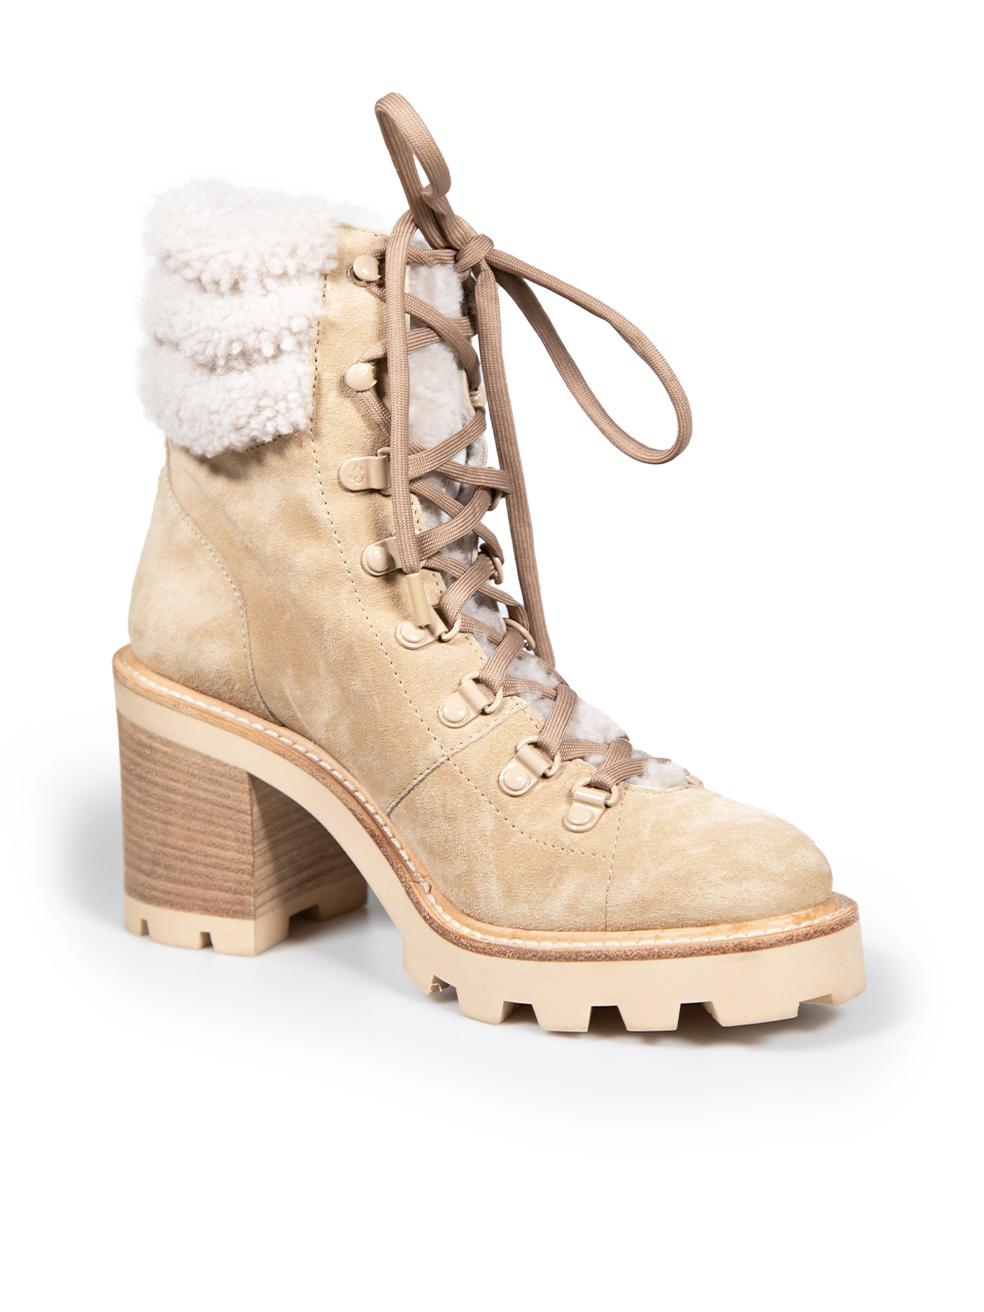 CONDITION is Very good. Minimal wear to boots is evident. Minimal scratches and discolouration on the back of the left shoe on this used Jimmy Choo designer resale item.
 
 
 
 Details
 
 
 Beige
 
 Suede
 
 Boots
 
 Mid calf
 
 Shearling lining
 
